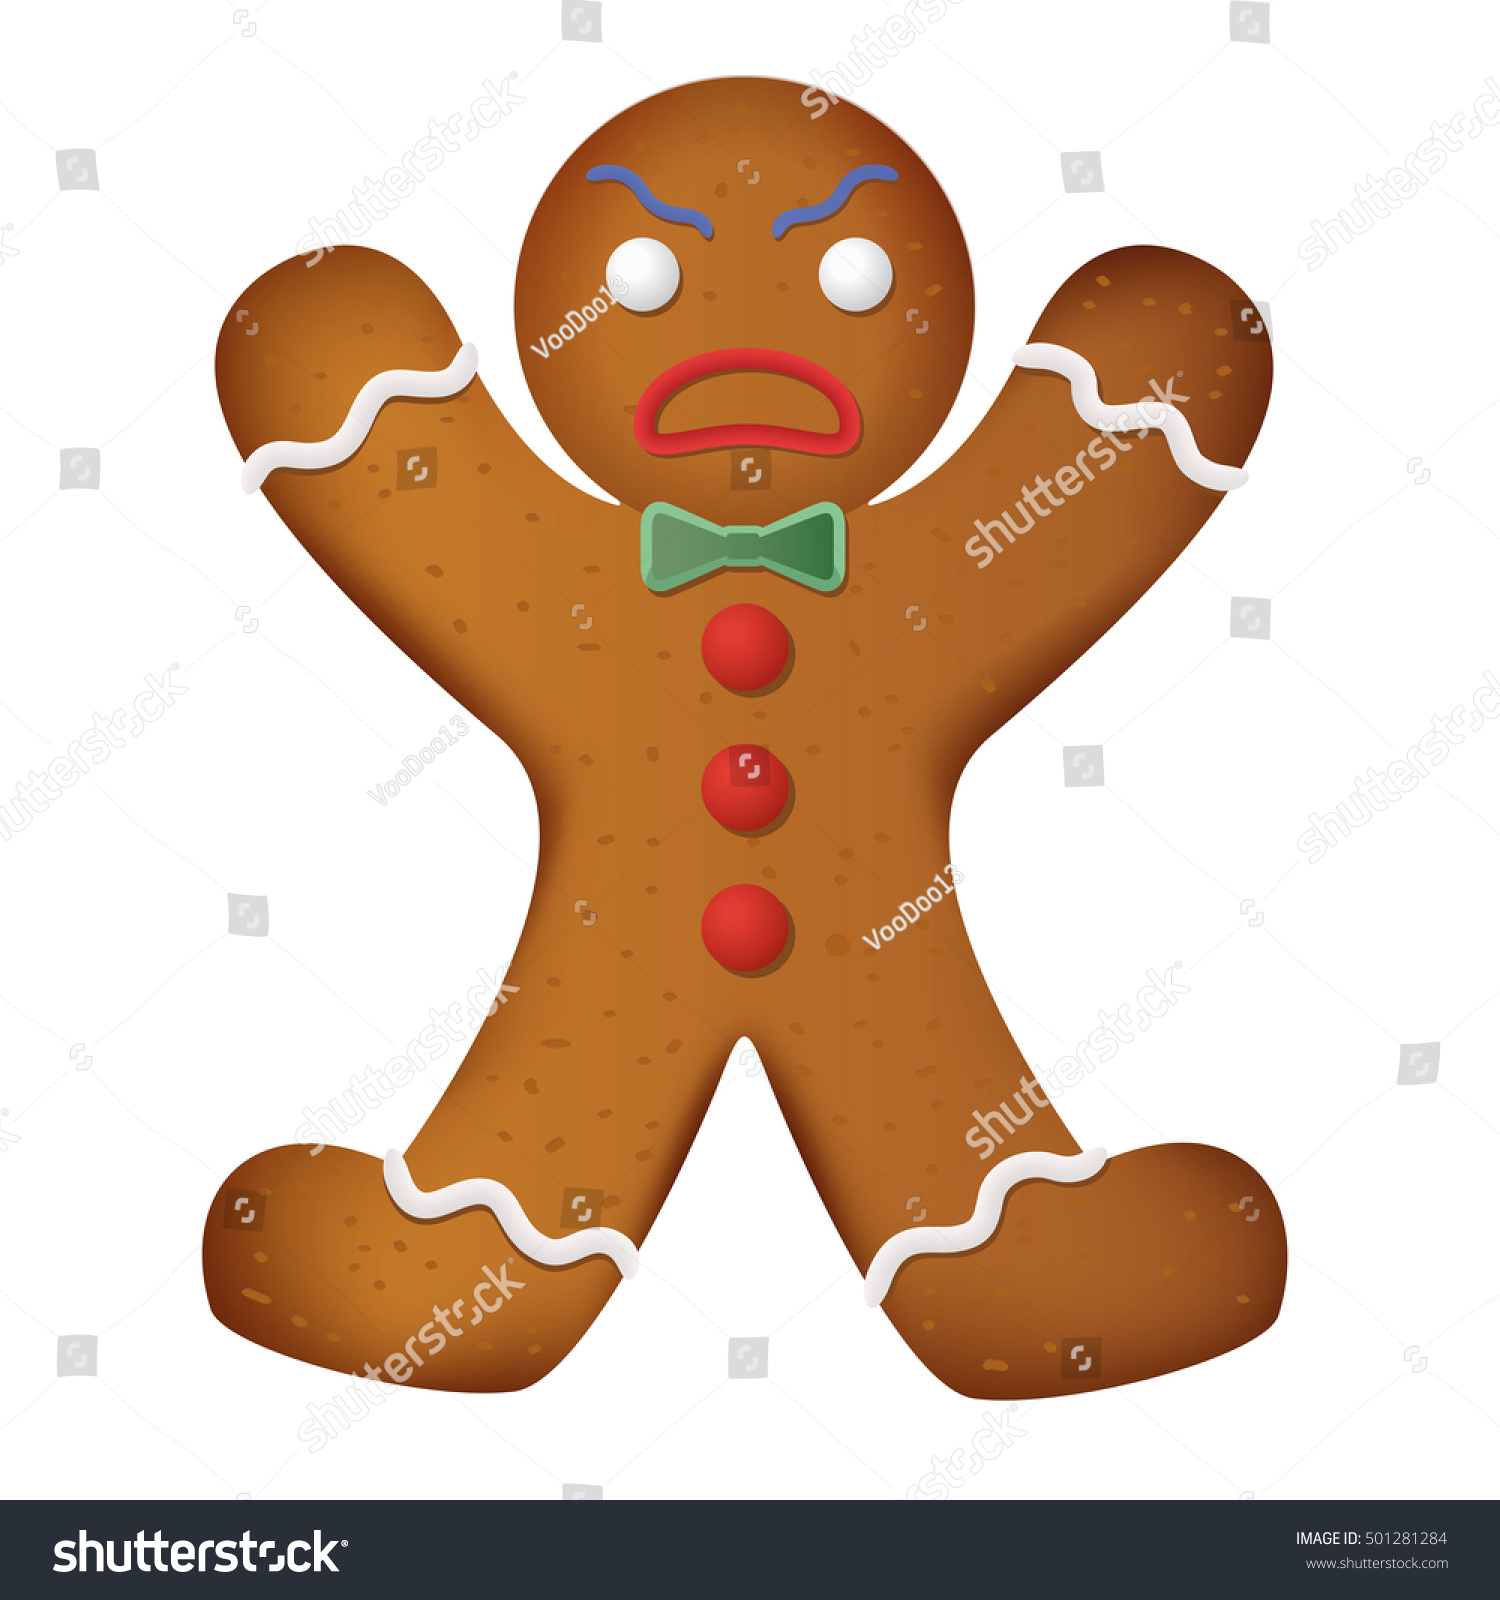 Gingerbread Man Decorated Funny Angry Vector Stock Vector.